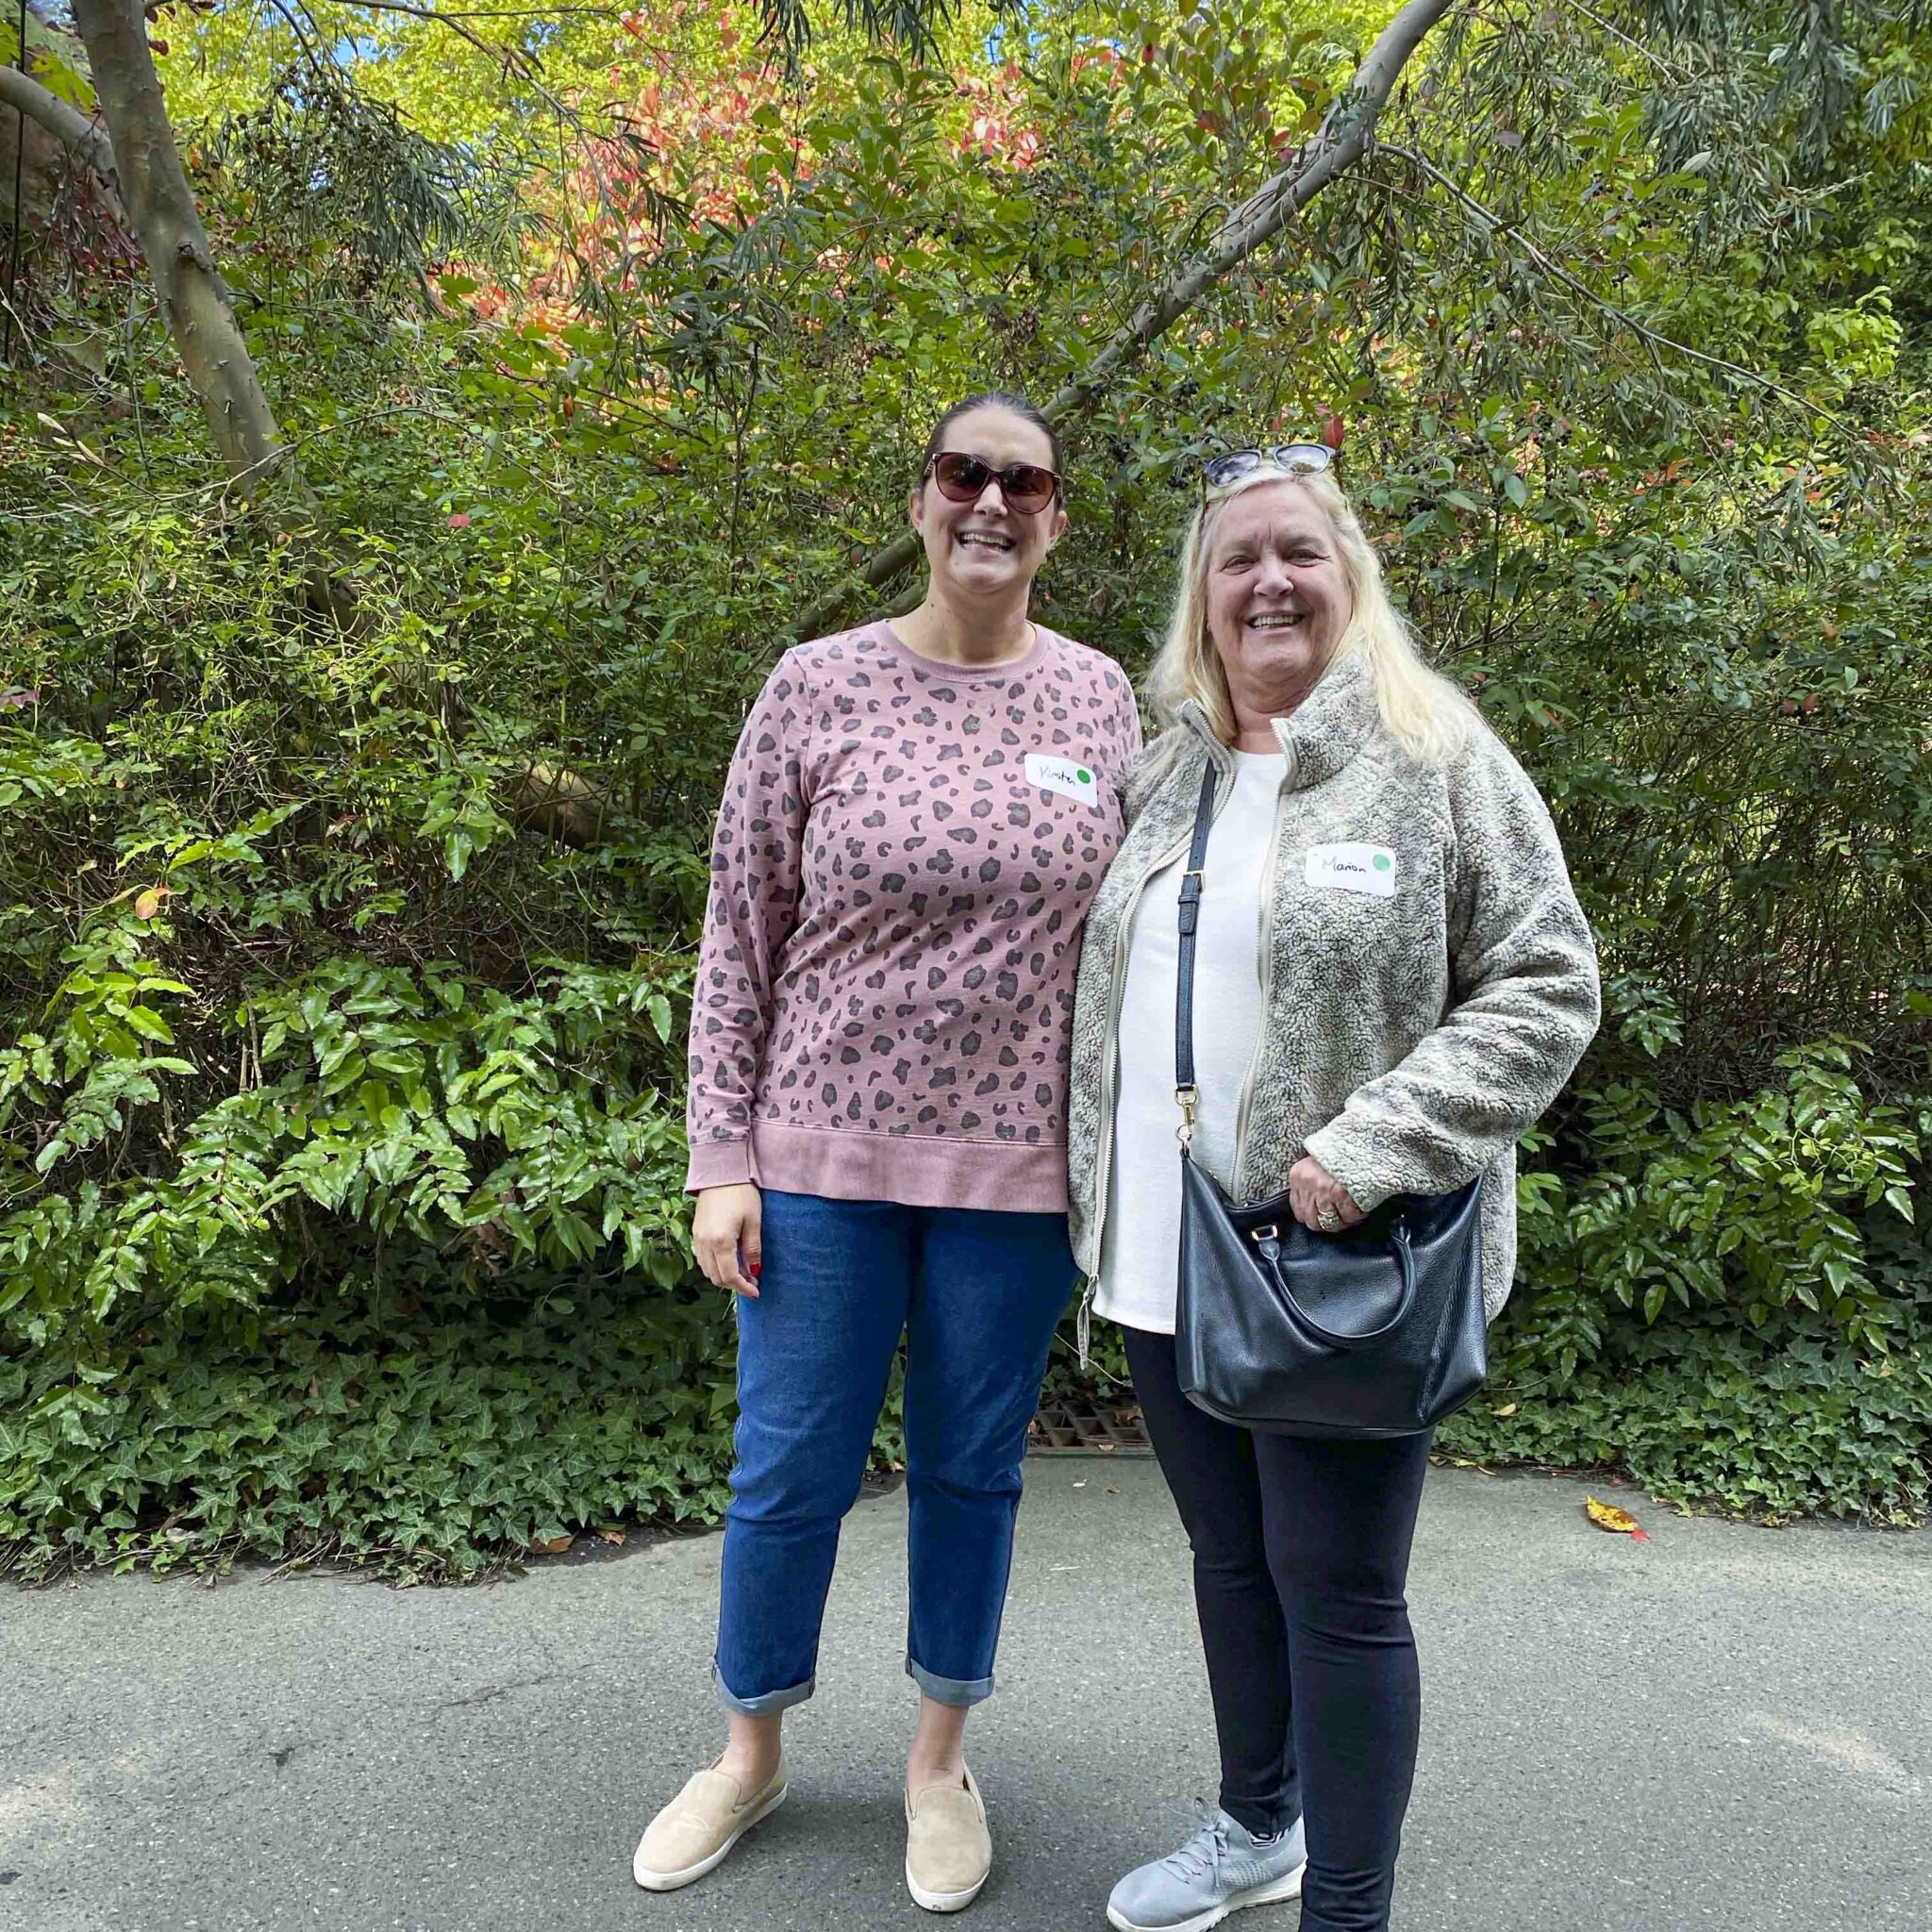 Two adult women walk together on a paved pathway in a wooded area at the Zoo.